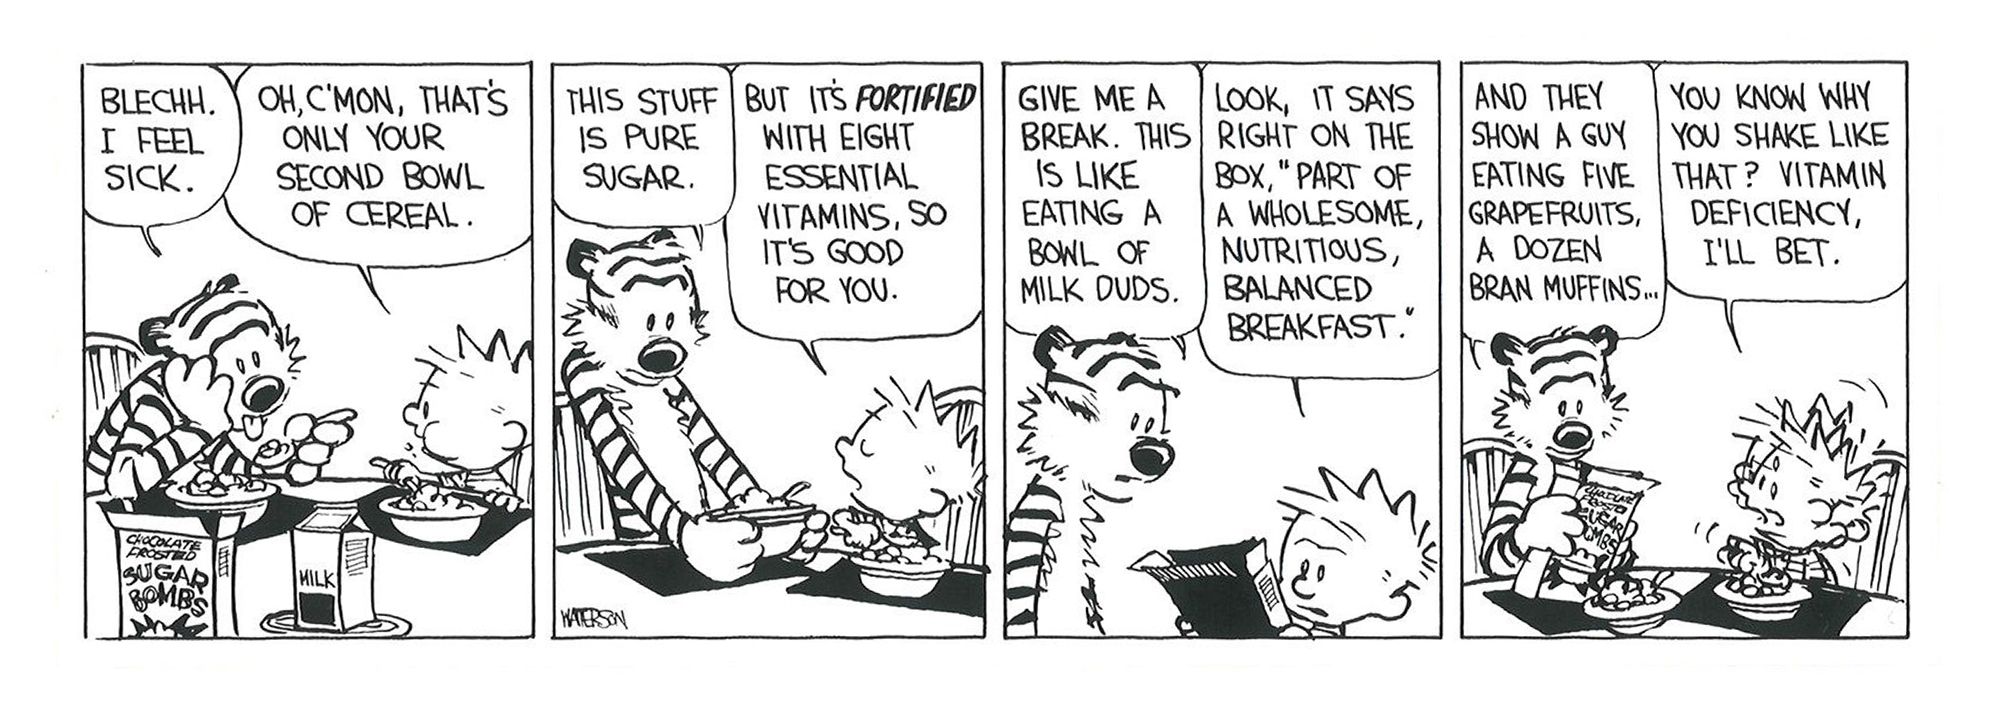 Calvin explains his favorite breakfast cereal, Chocolate Frosted Sugar Bombs, to Hobbes